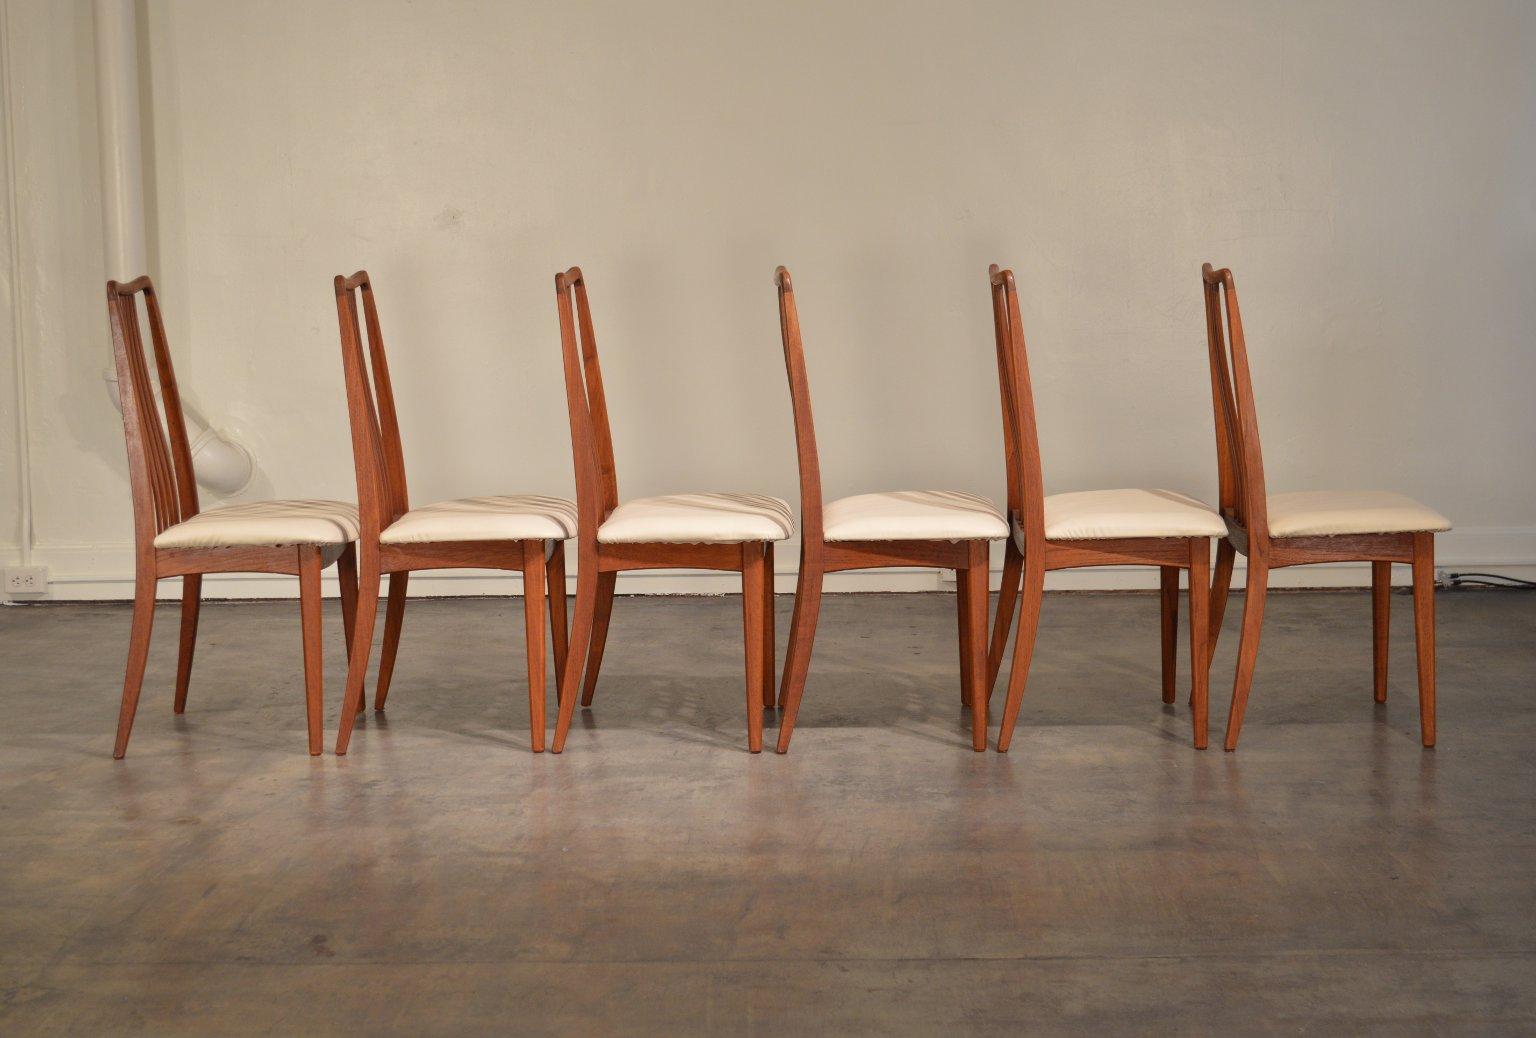 A set of six high-back teak dining chairs designed by Anders Jensen for Holstebro of Denmark. The solid teak backs have sculptural tops and the slats have a gentle s-curve.

White vinyl seat upholstery. All six chairs have original translucent